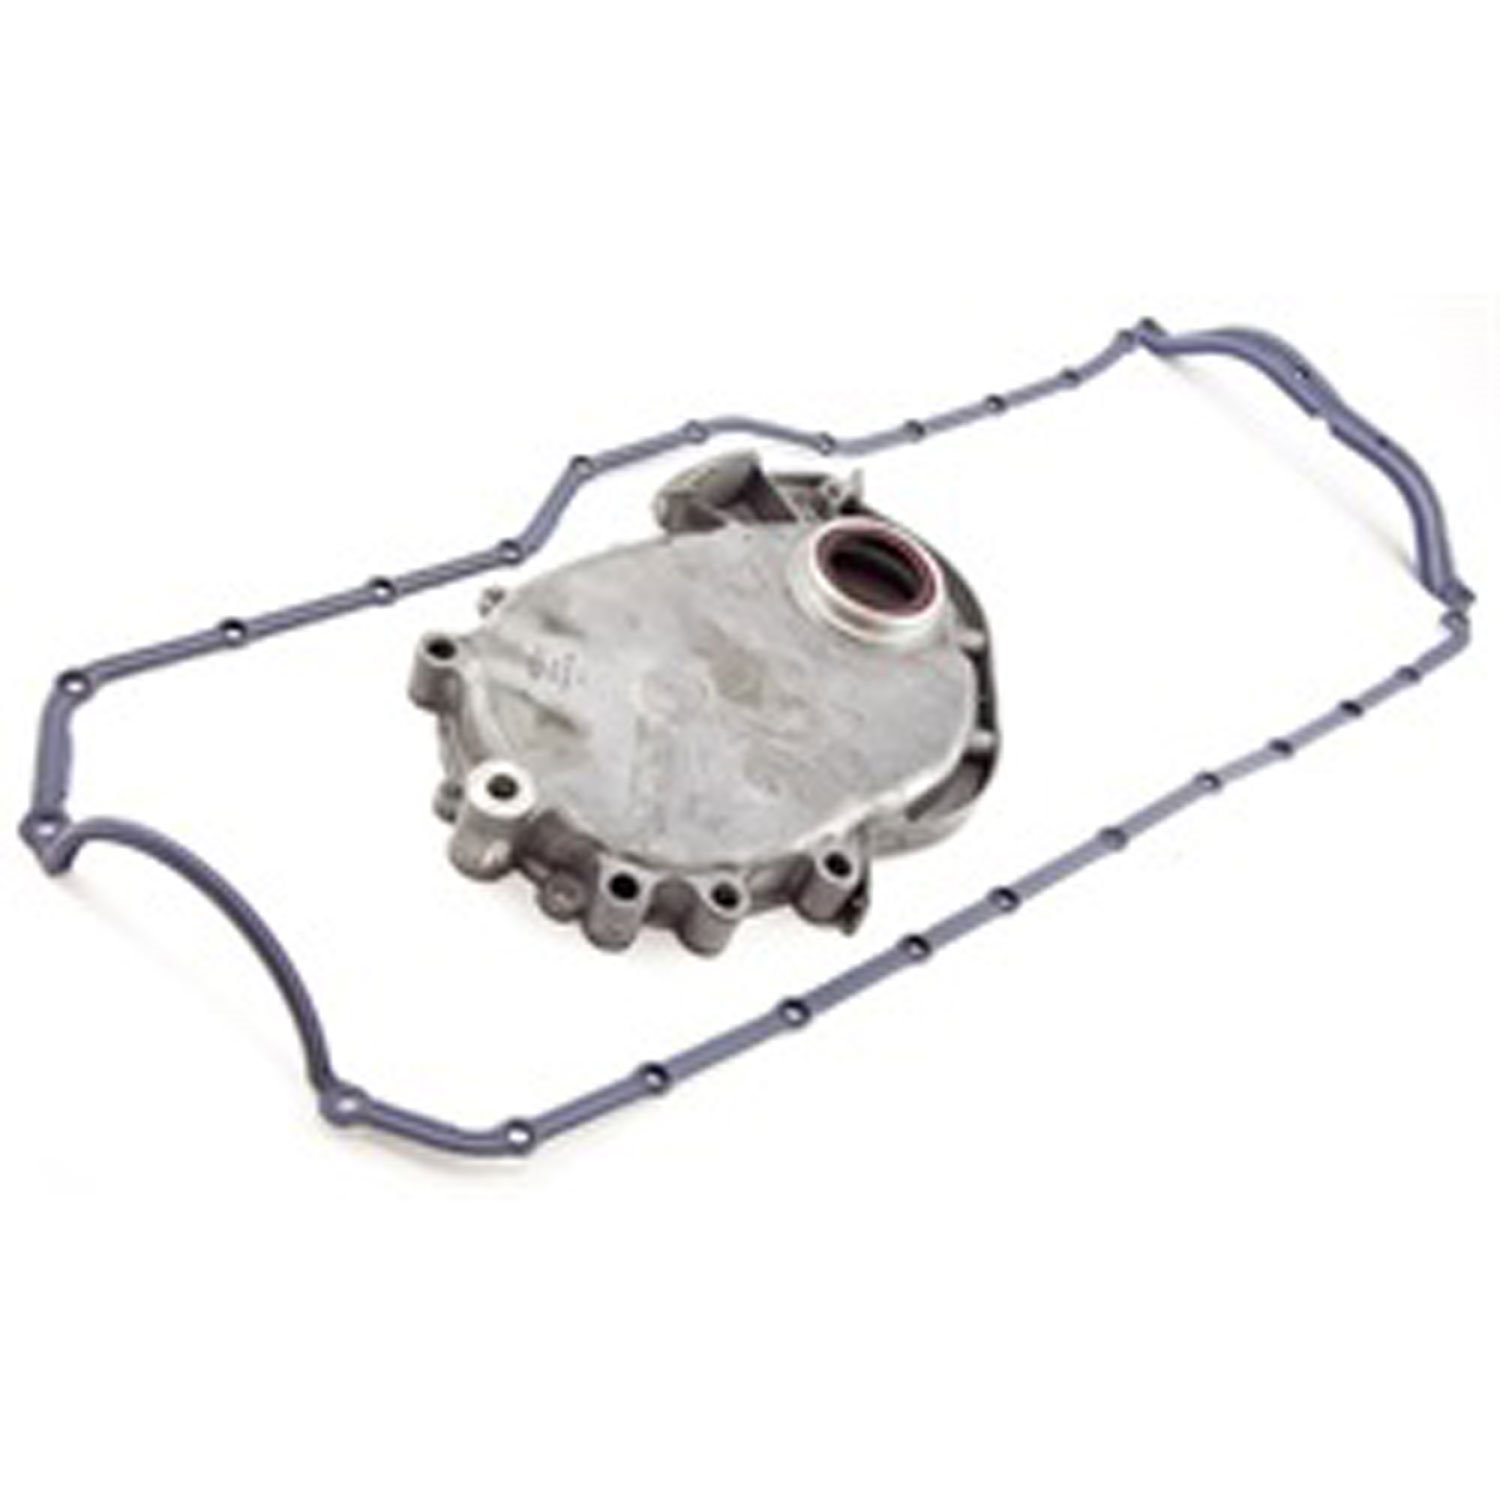 Replacement timing chain cover kit from Omix-ADA, Fits 93-99 Jeep Wrangler 93-01 Cherokees and 9